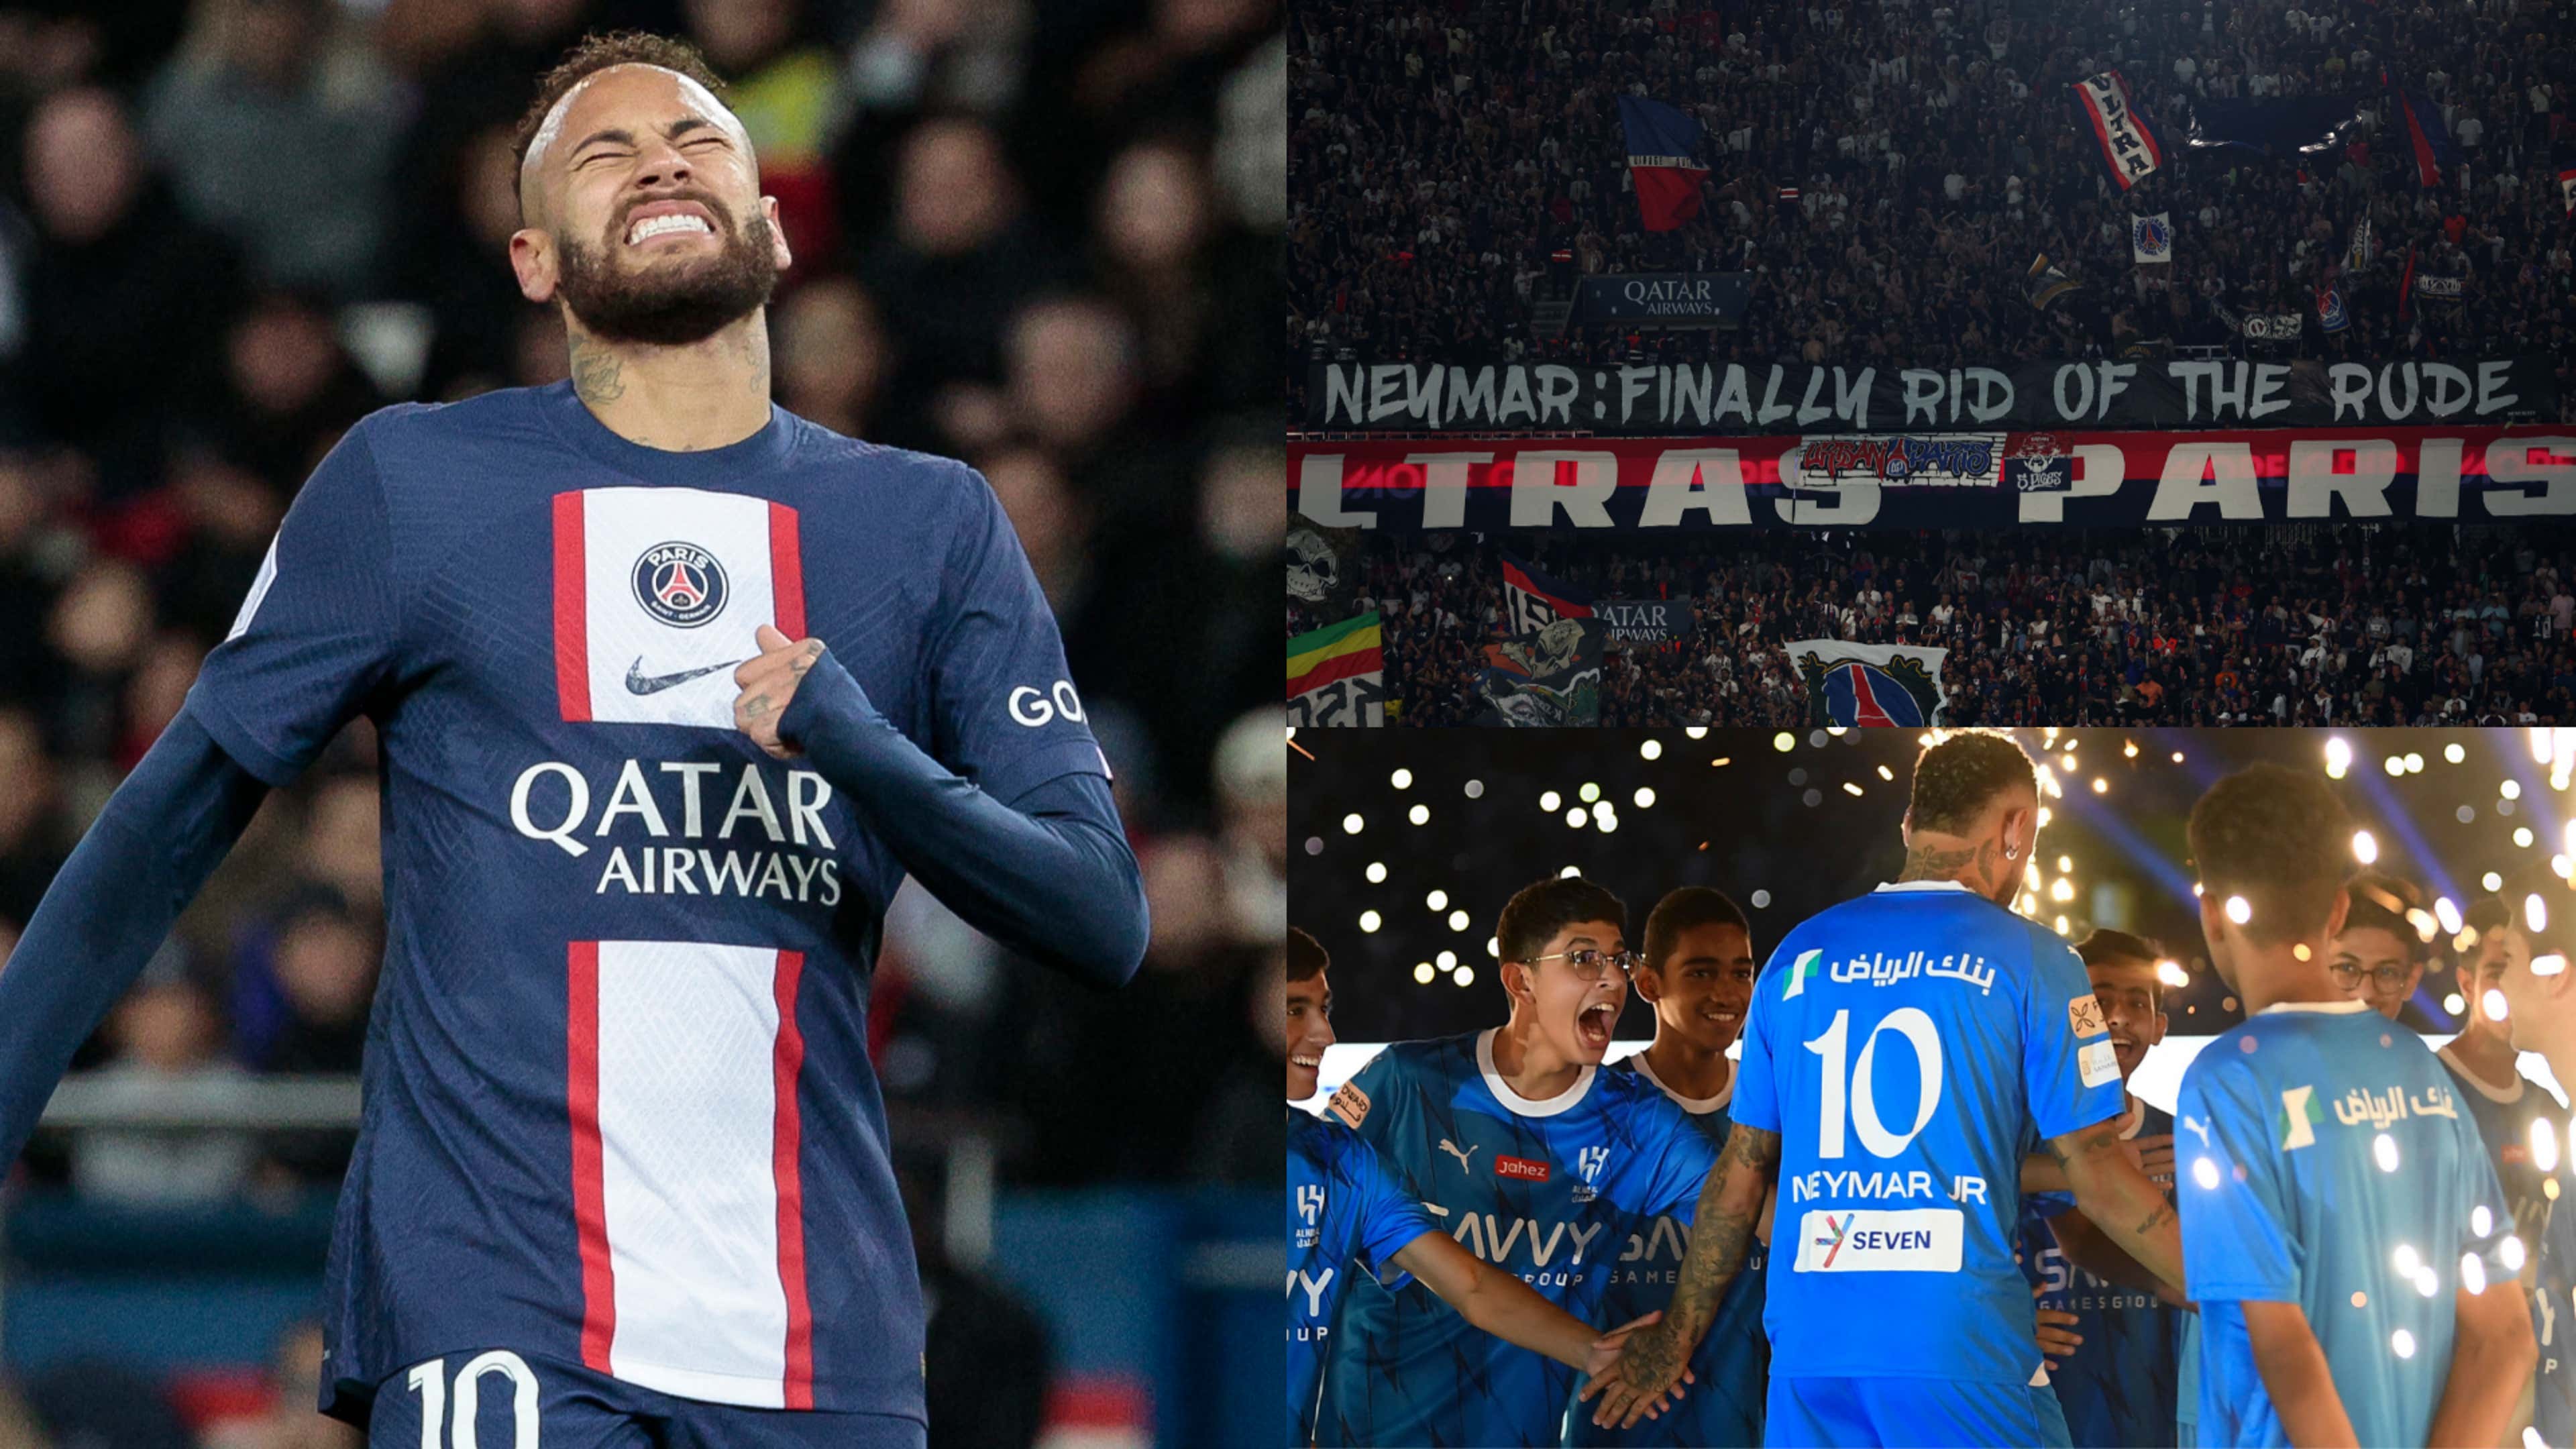 'Finally rid of the rude!' - PSG ultras show they are happy to see ...